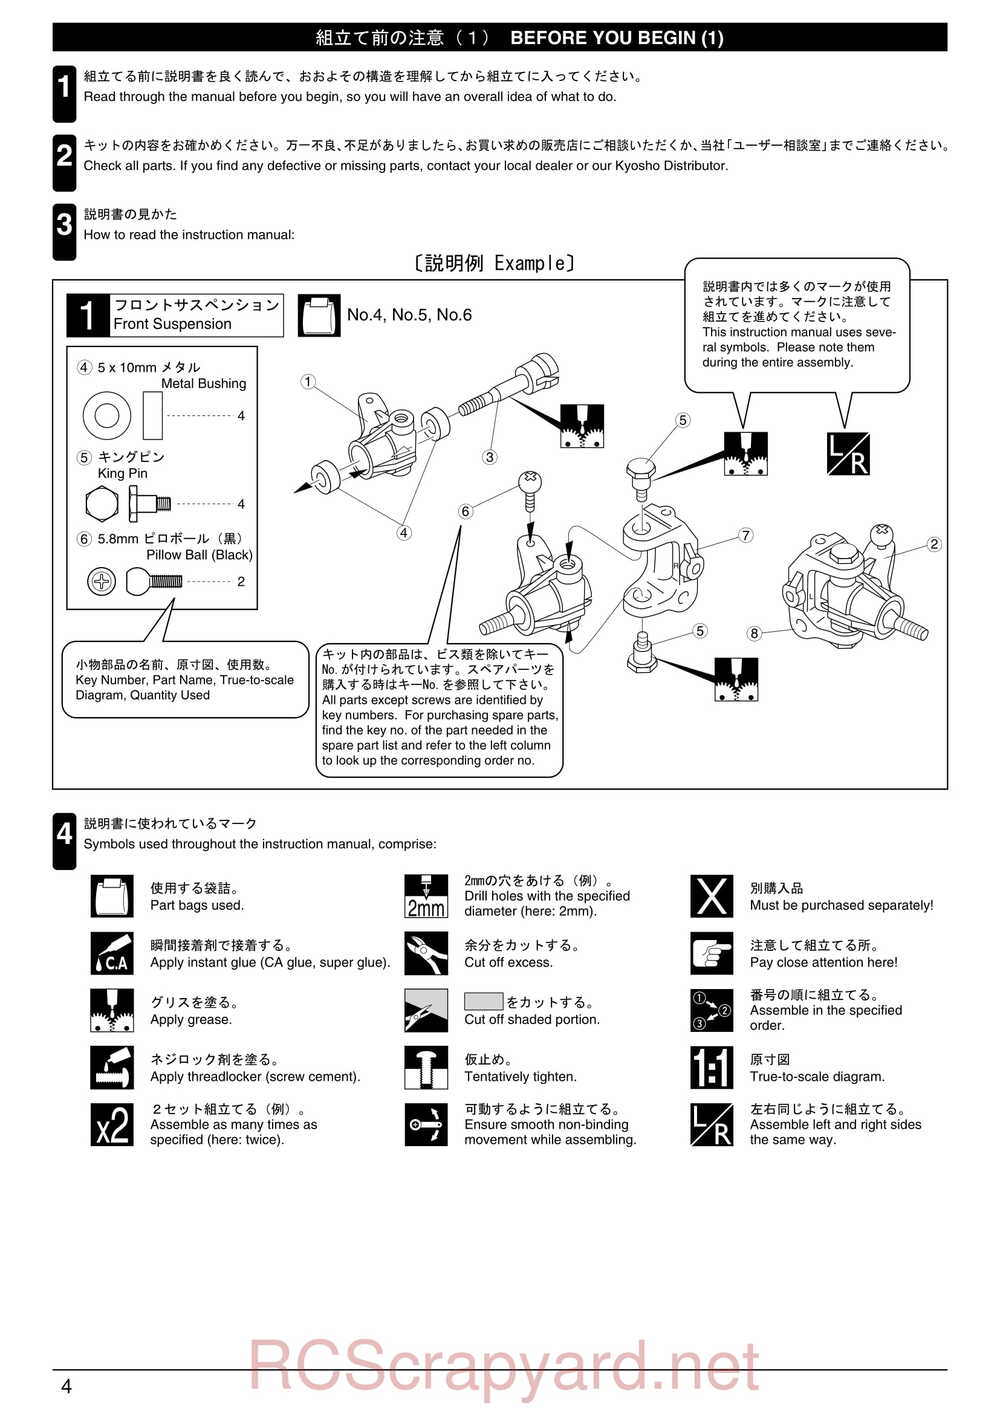 Kyosho - 31224 - Mad-Armour - Manual - Page 04